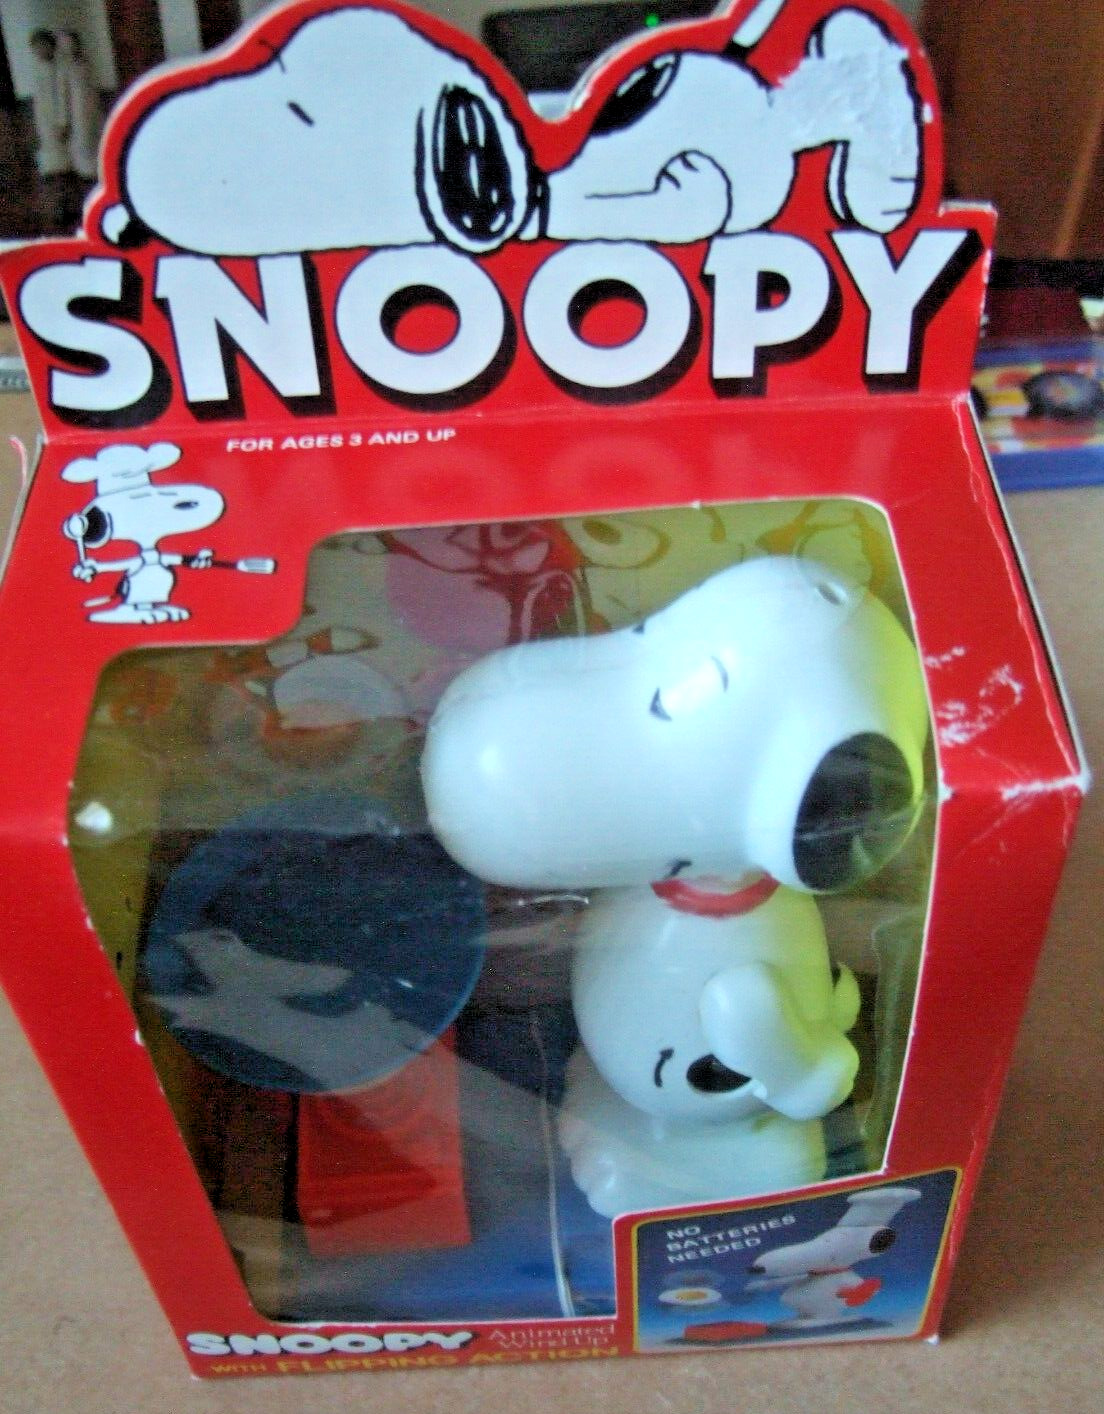 1958  SNOOPY COOK ANIMATED WIND-UP WITH FLIPPING ACTION   ORIGINAL BOX   No. 829